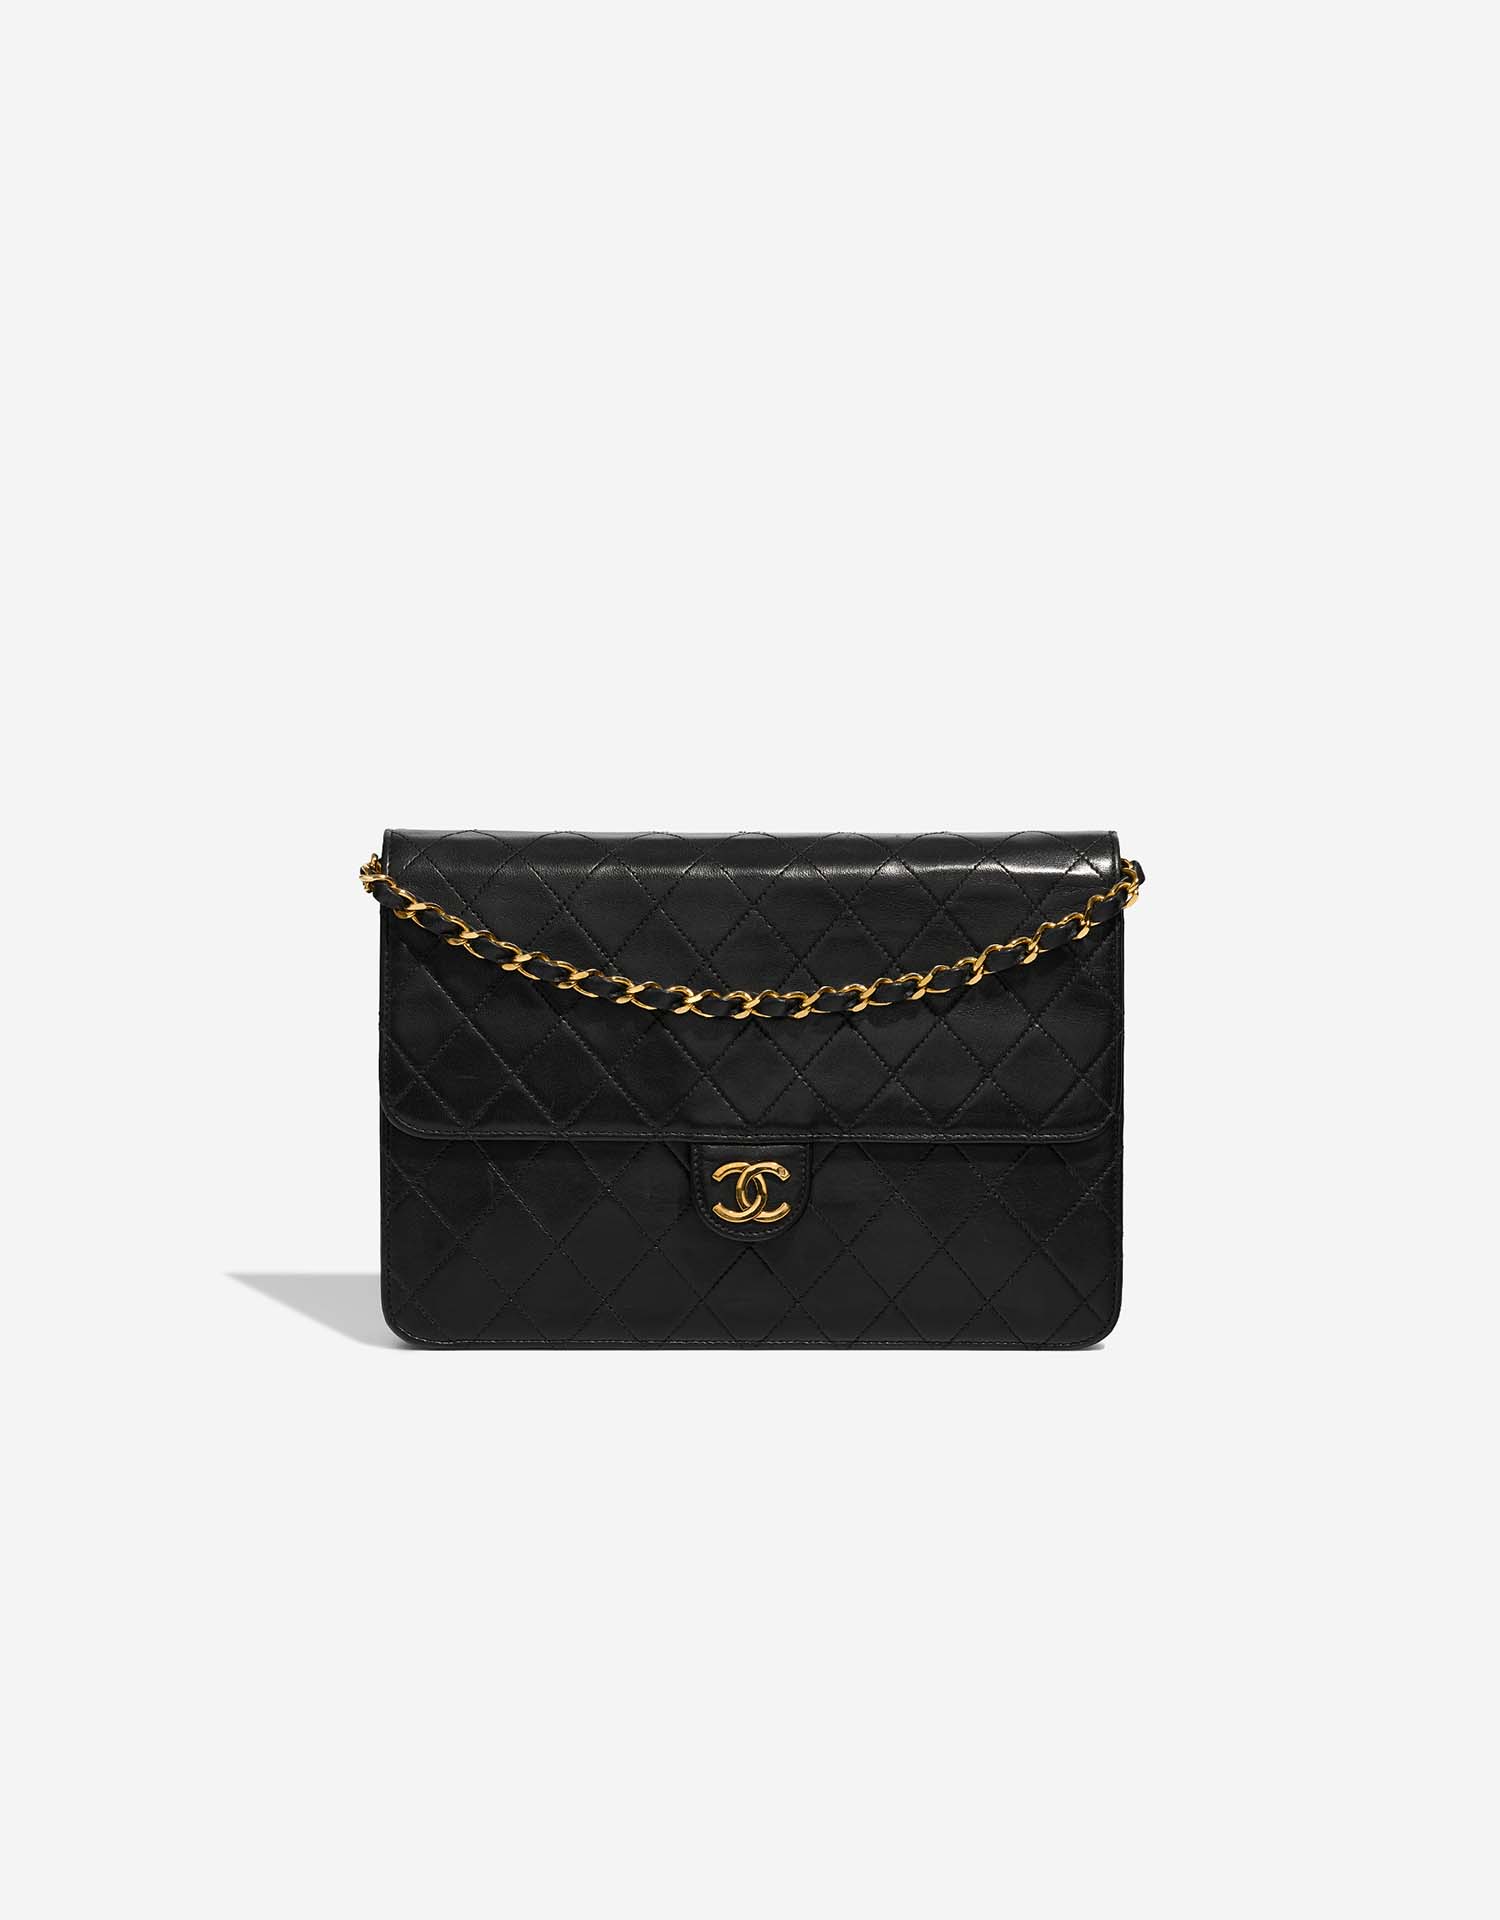 chanel black and gold clutch bag